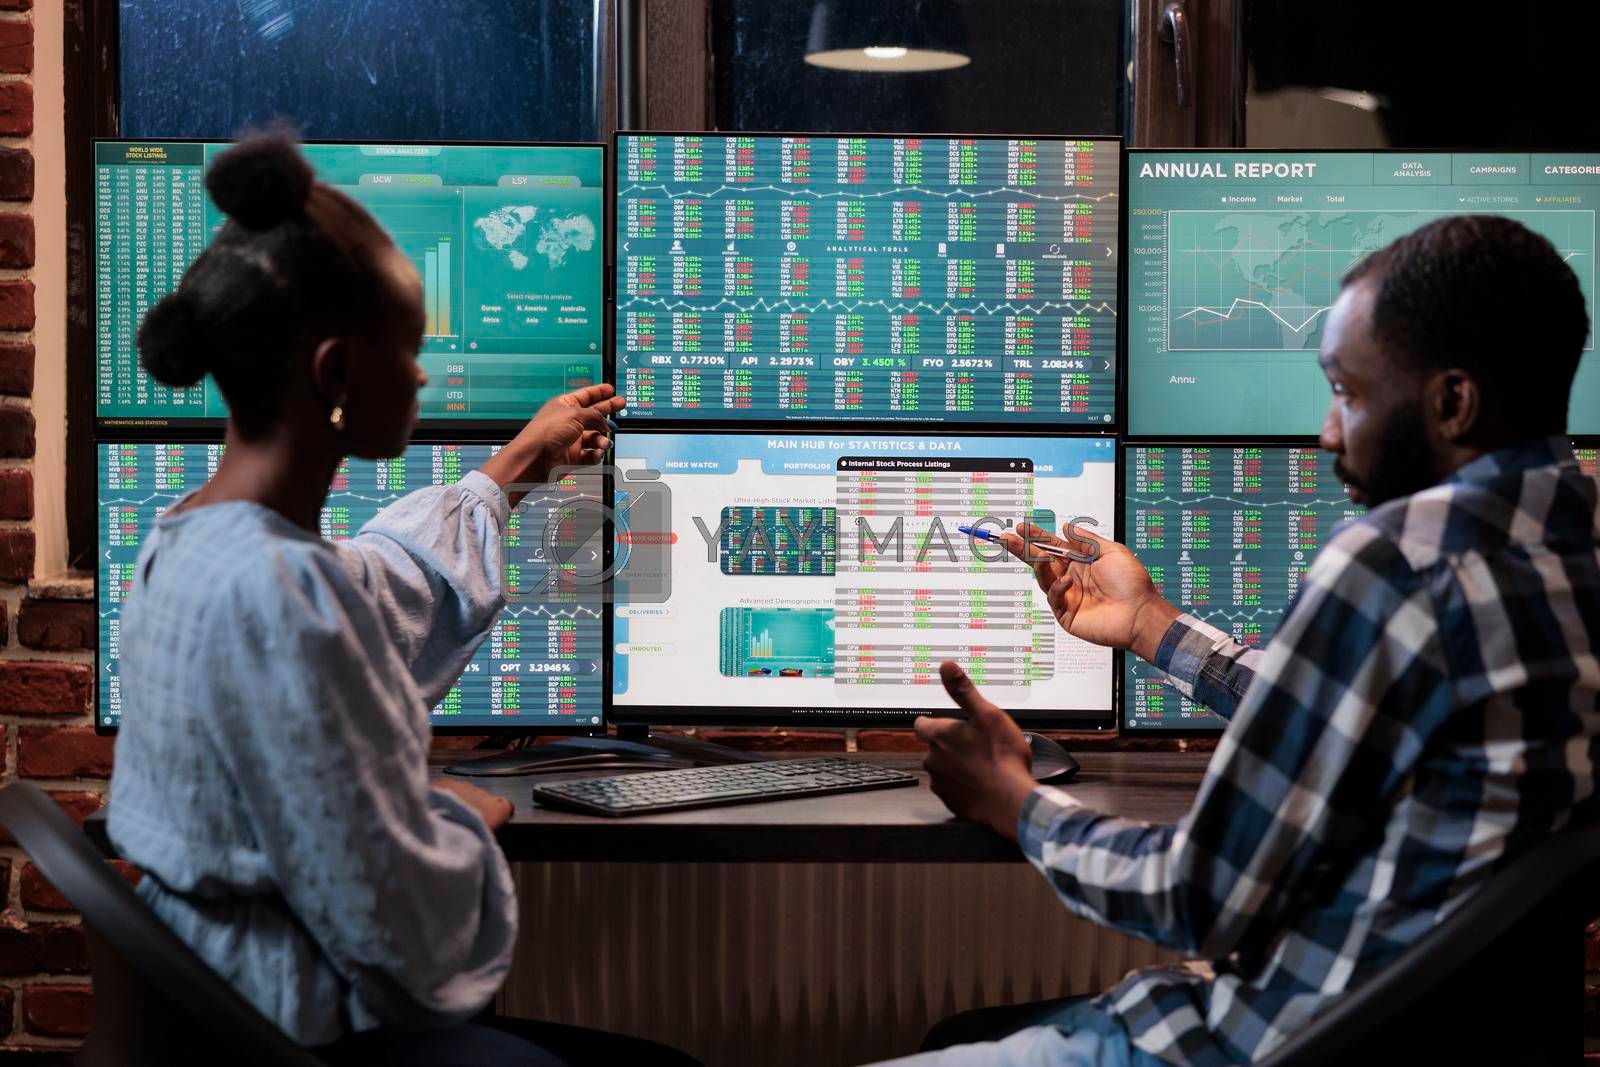 African american financial advisors reviewing real time market data and statistics in order to sell stocks. Hedge fund traders sitting at workstation while pointing at display with live index charts.